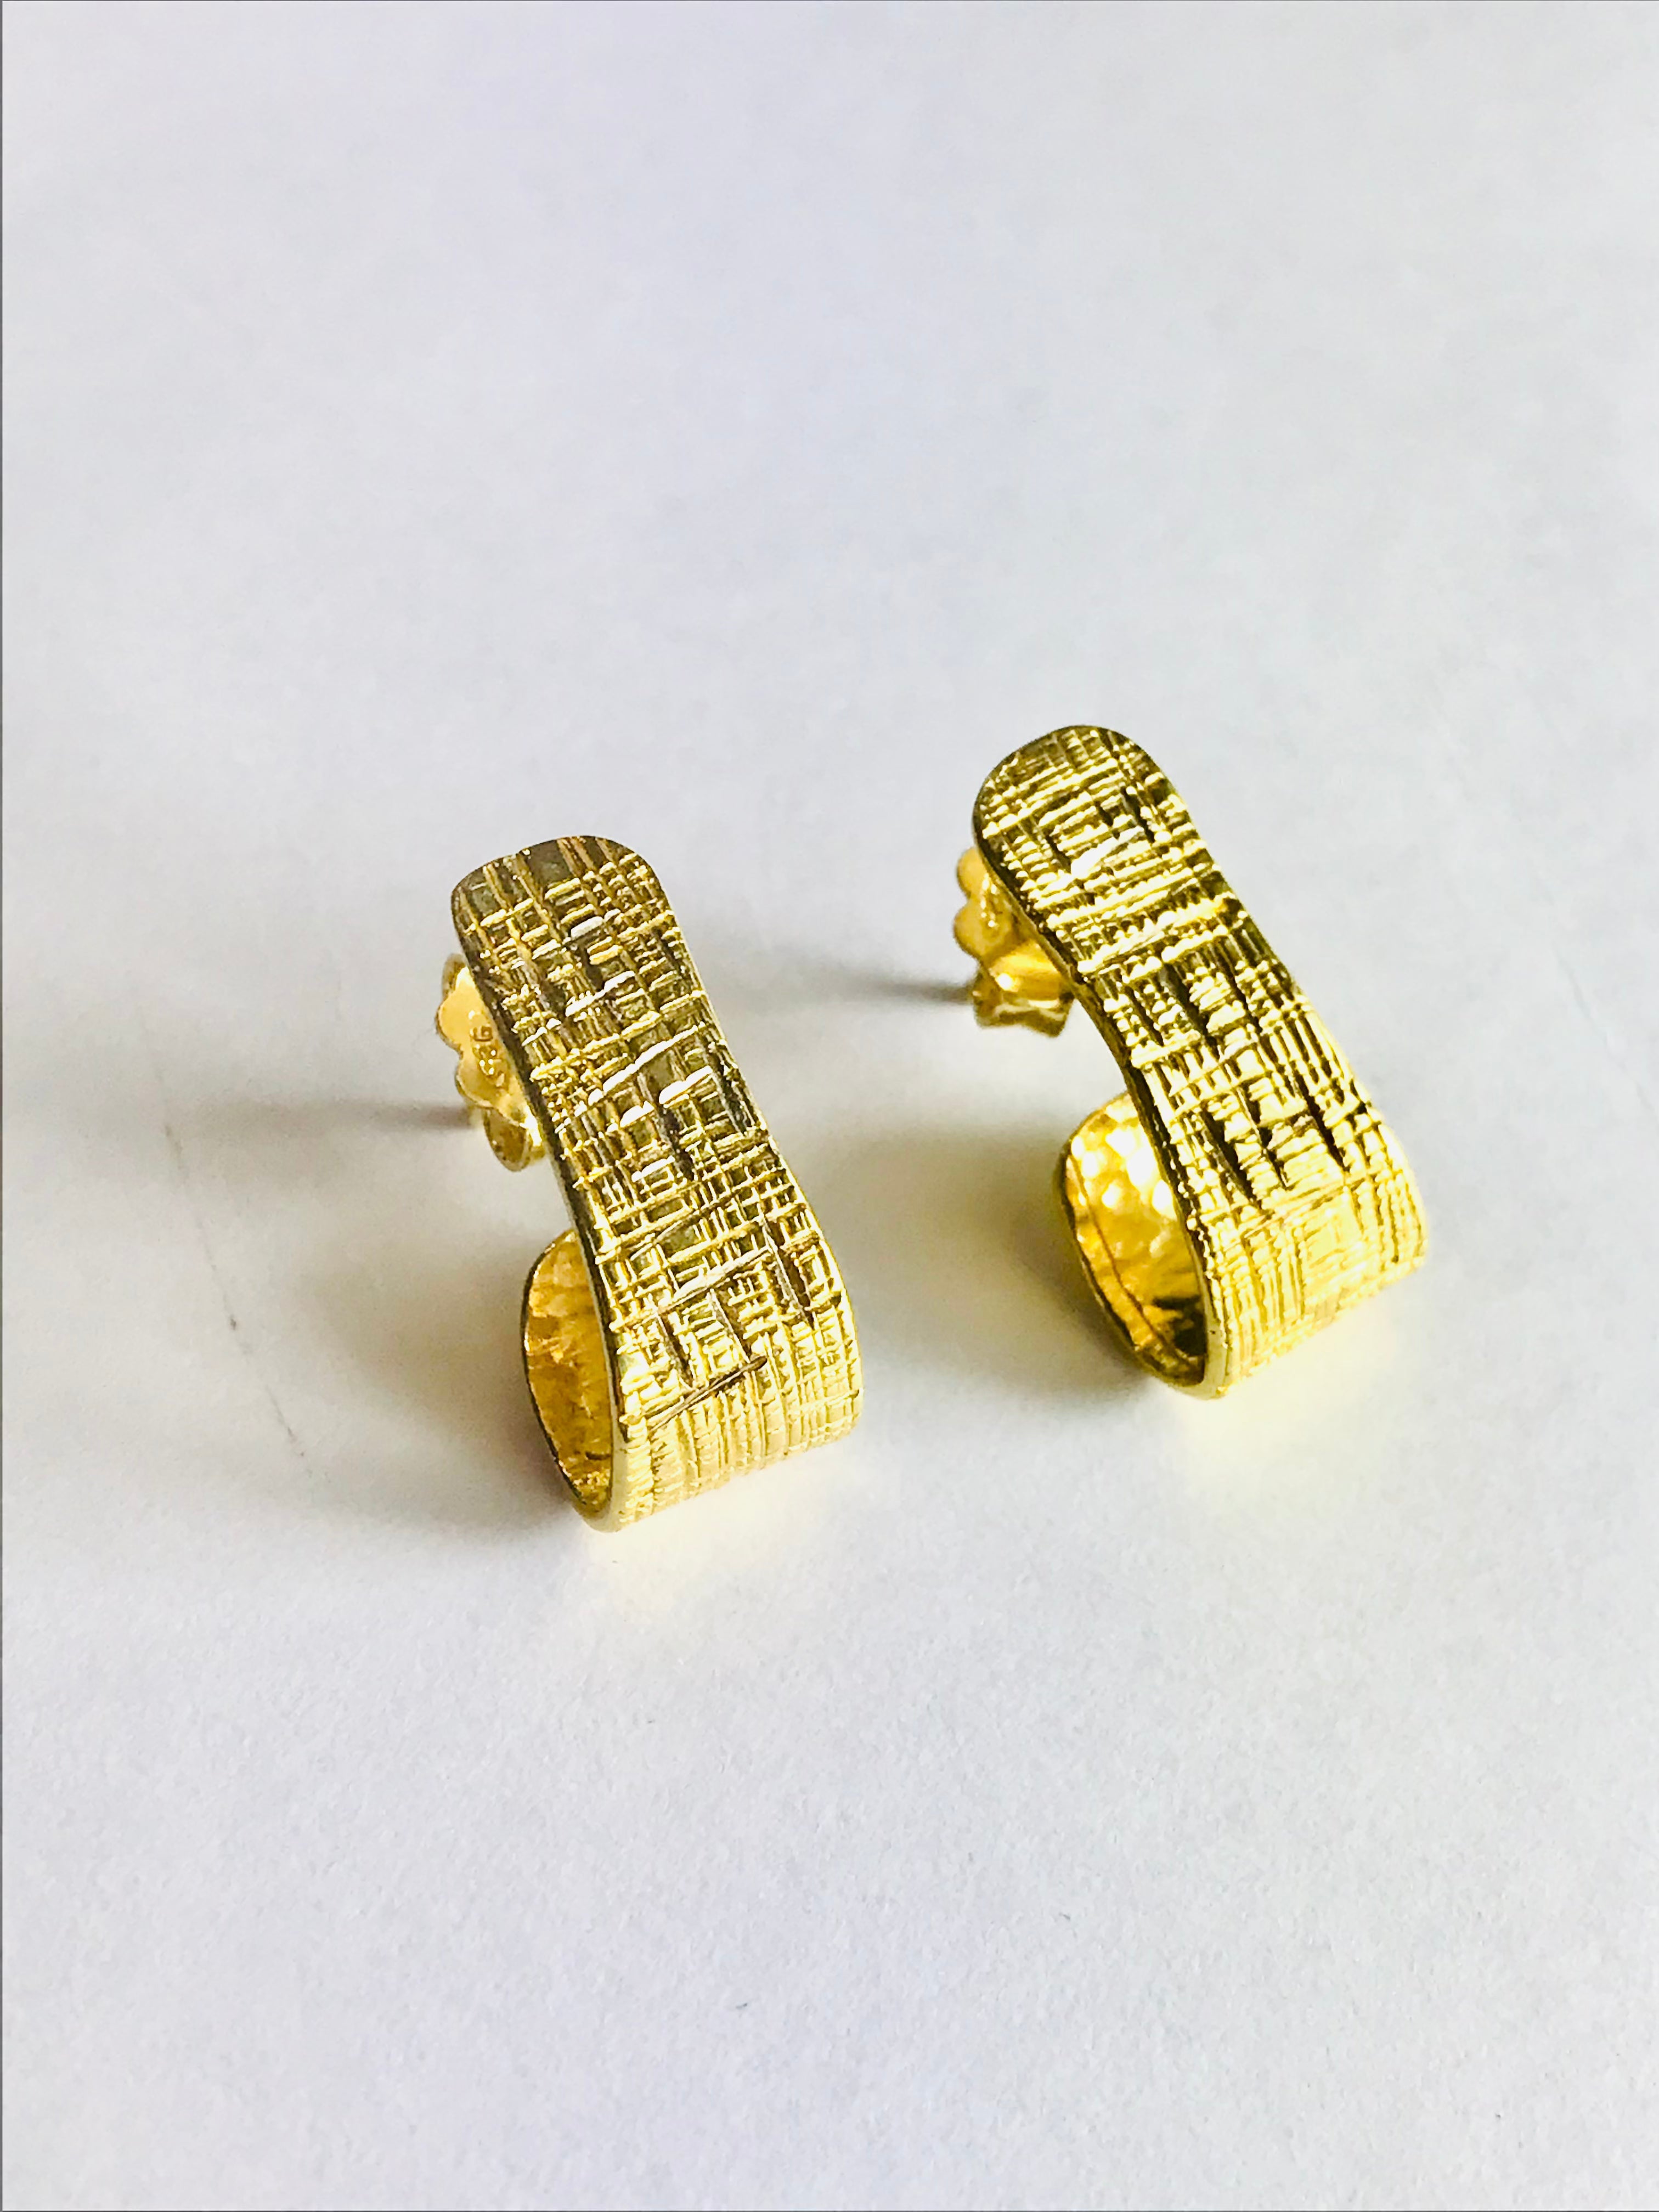 Gold Curled Studs - The Nancy Smillie Shop - Art, Jewellery & Designer Gifts Glasgow